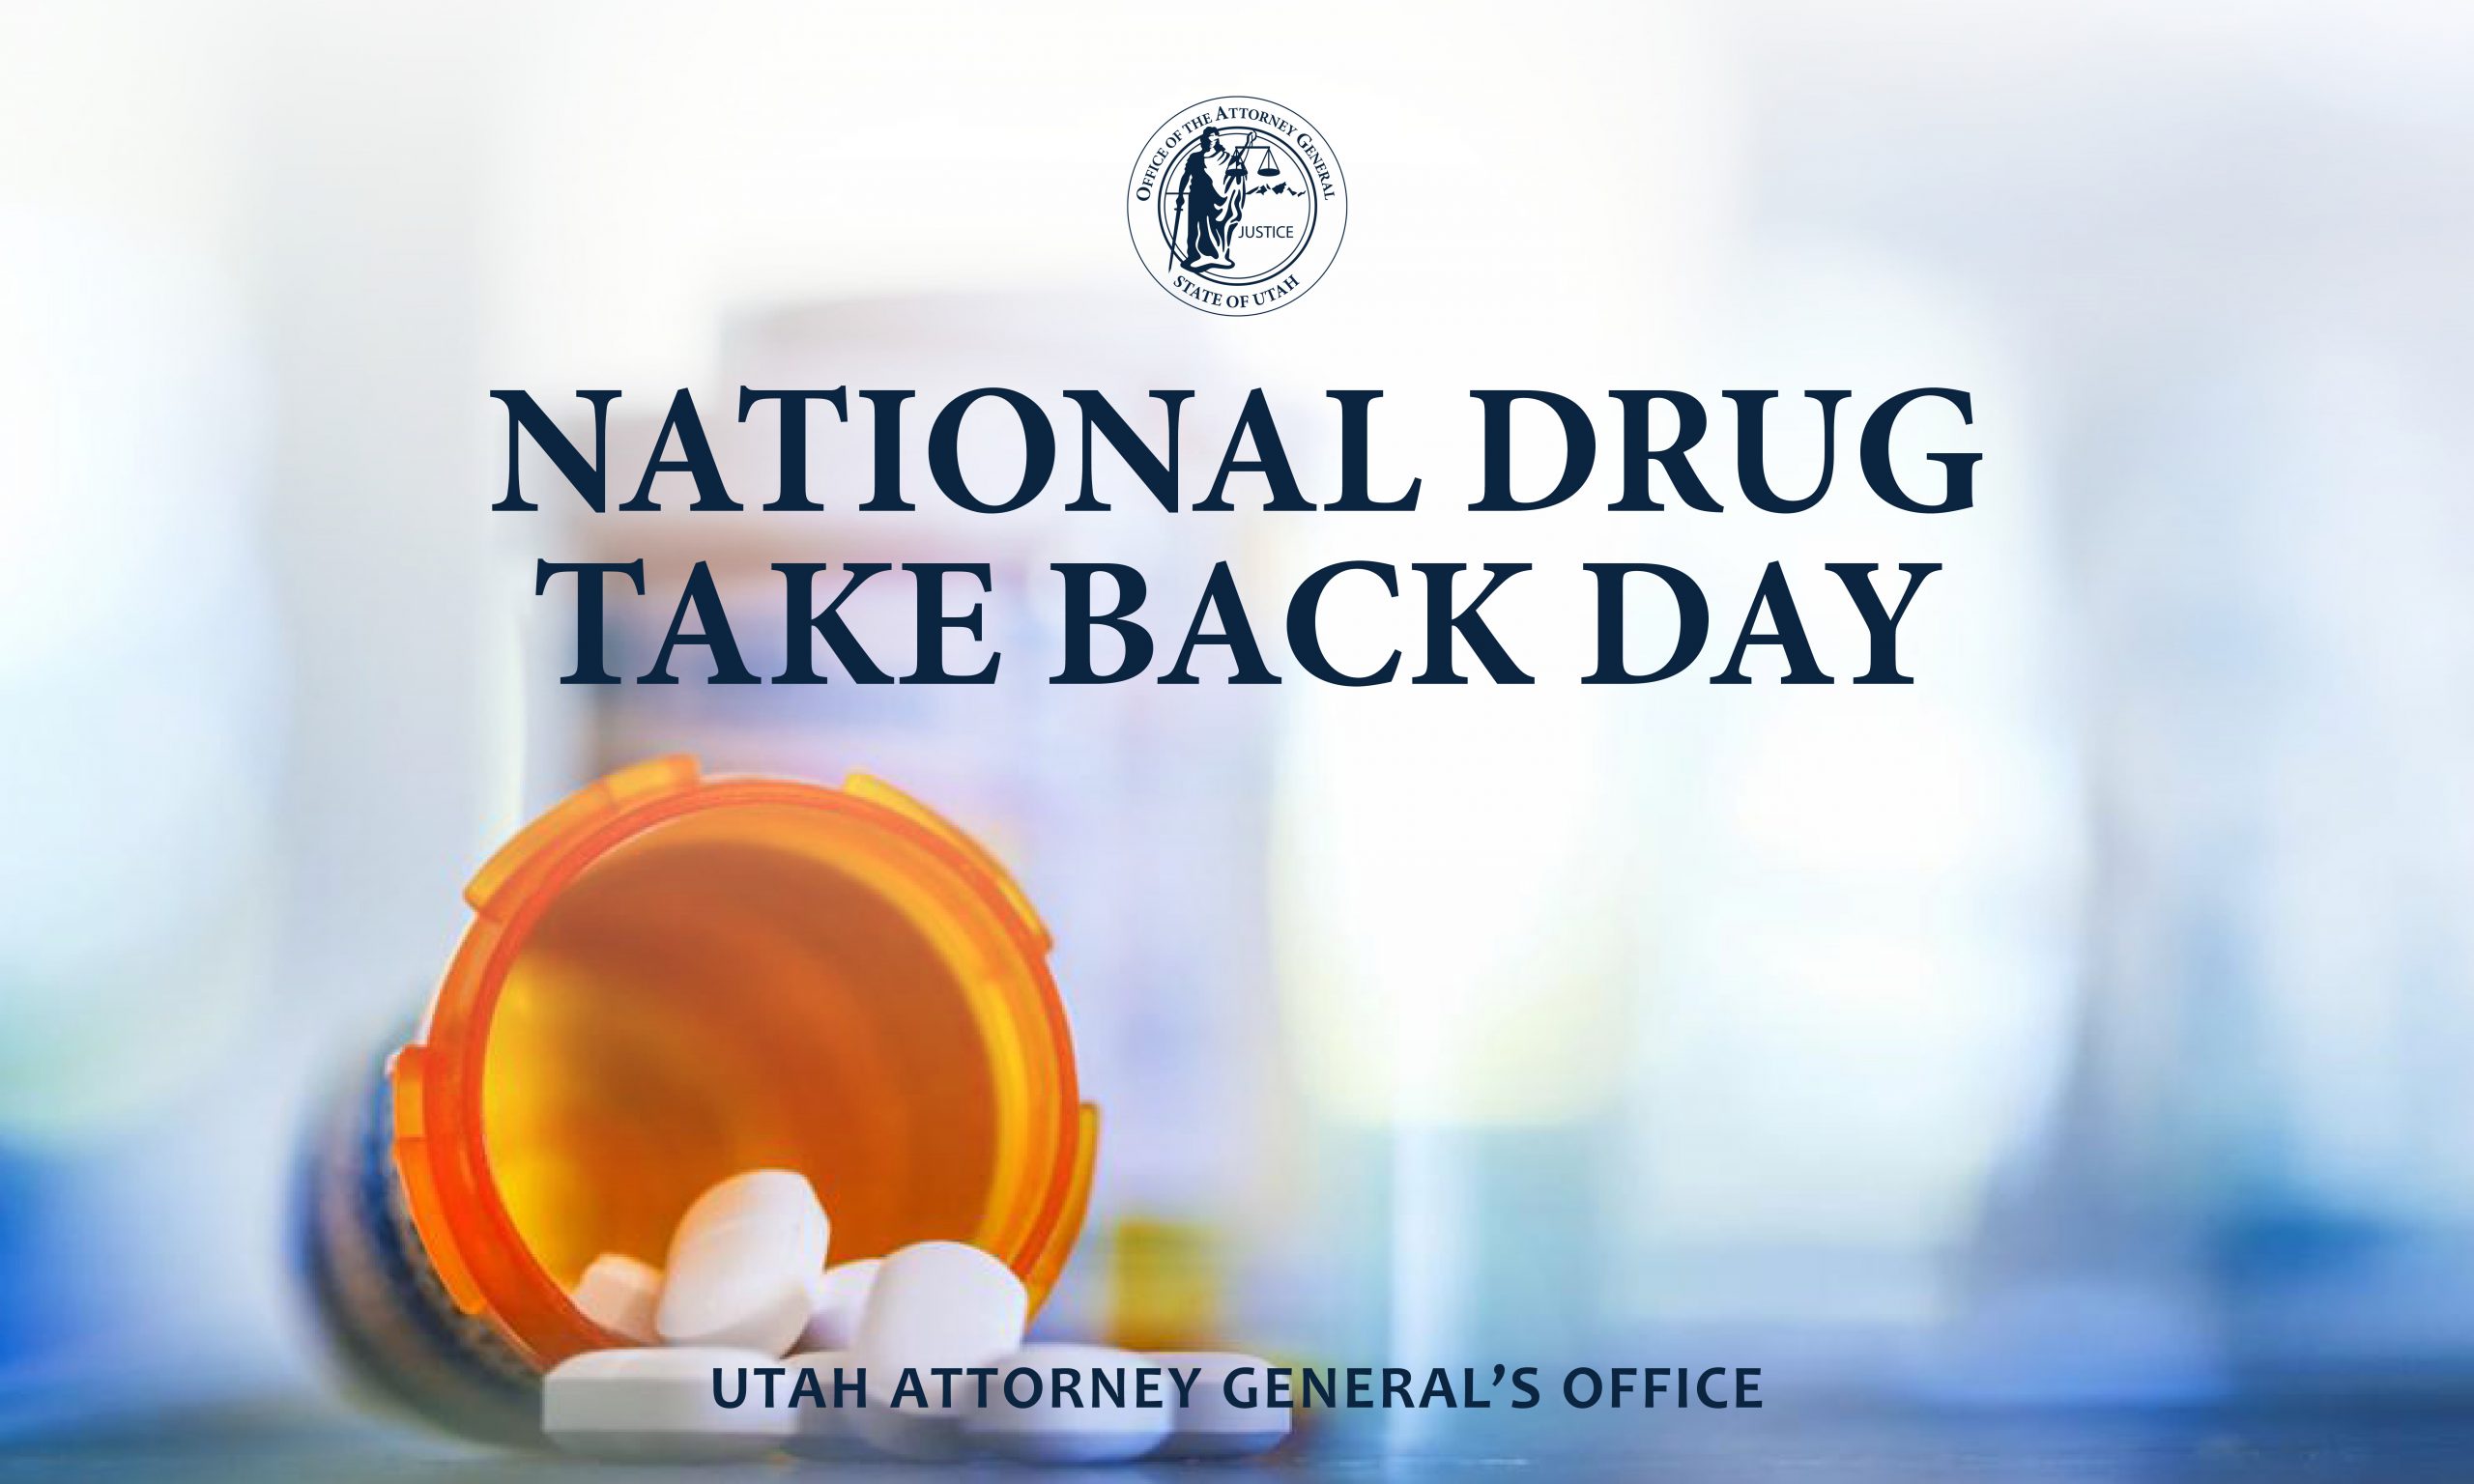 Take-Back Day: Dispose of Old Prescriptions Safely - Utah Attorney General